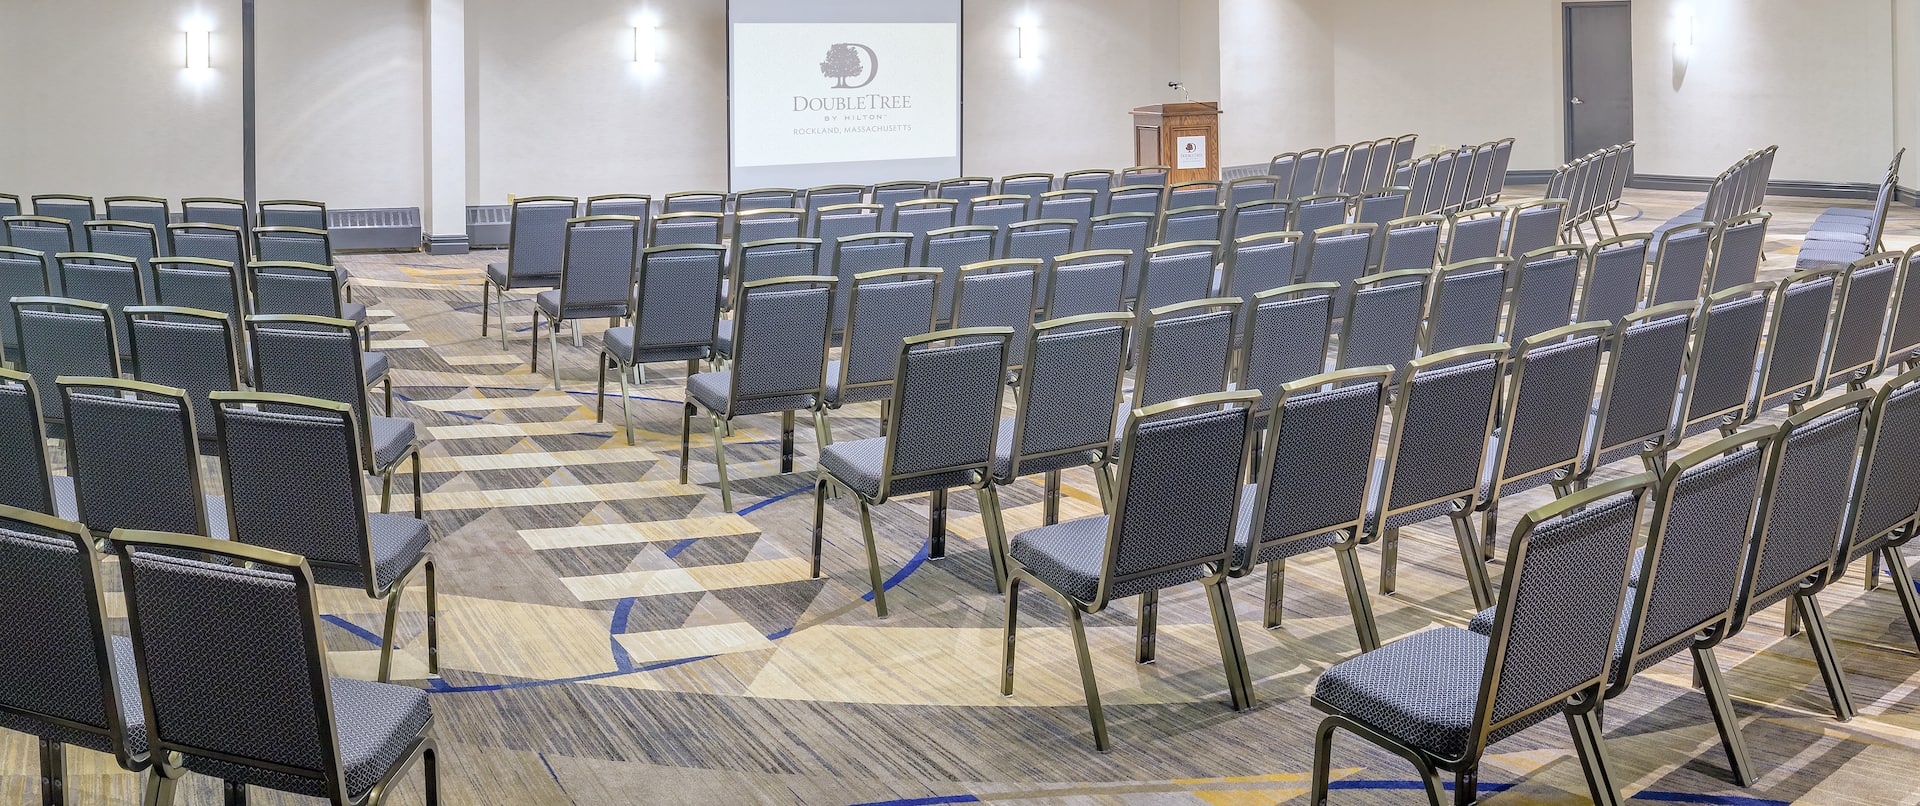 Meeting Room Arranged Theater Style With Rows of Chairs Facing Projector Screen and Podium